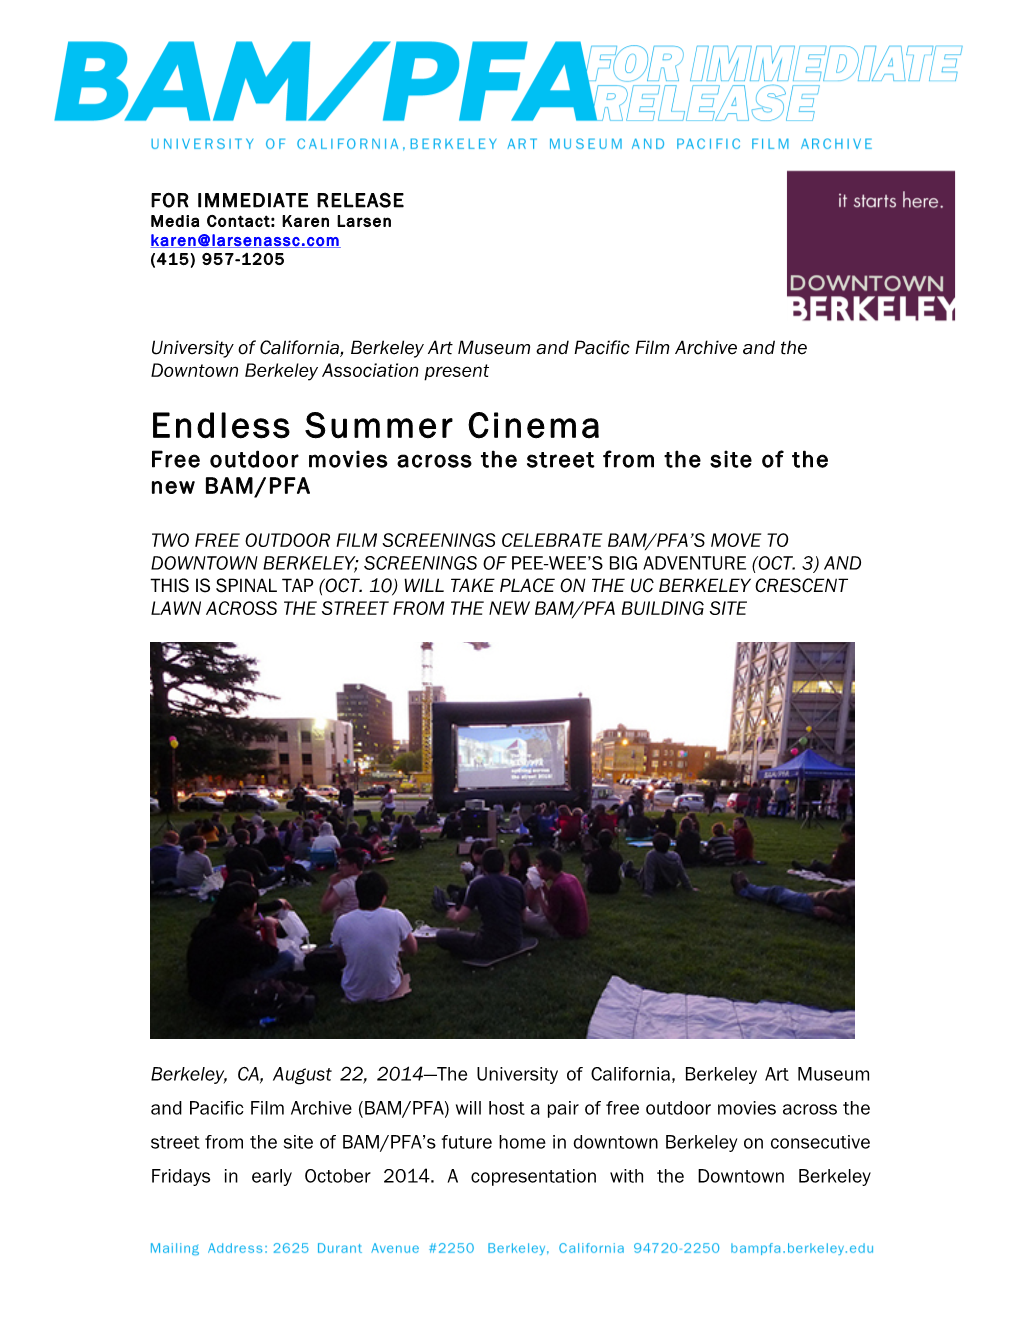 Endless Summer Cinema Free Outdoor Movies Across the Street from the Site of the New BAM/PFA